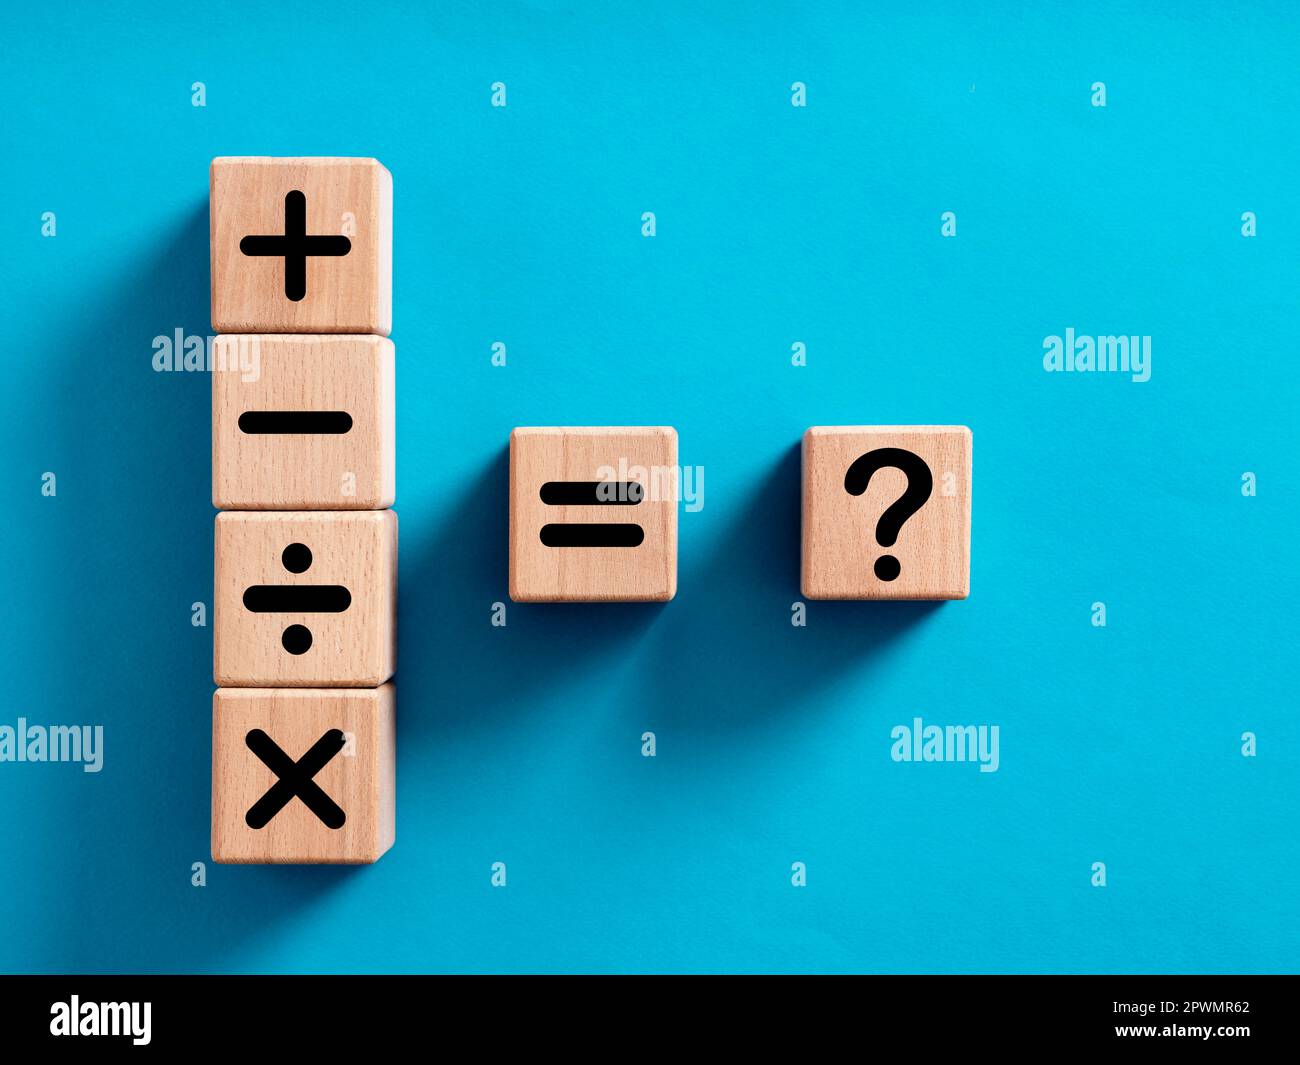 Basic mathematical operations symbols. Plus, minus, multiply, divide, equal and question mark symbols on wooden cubes. Mathematic or math action, educ Stock Photo